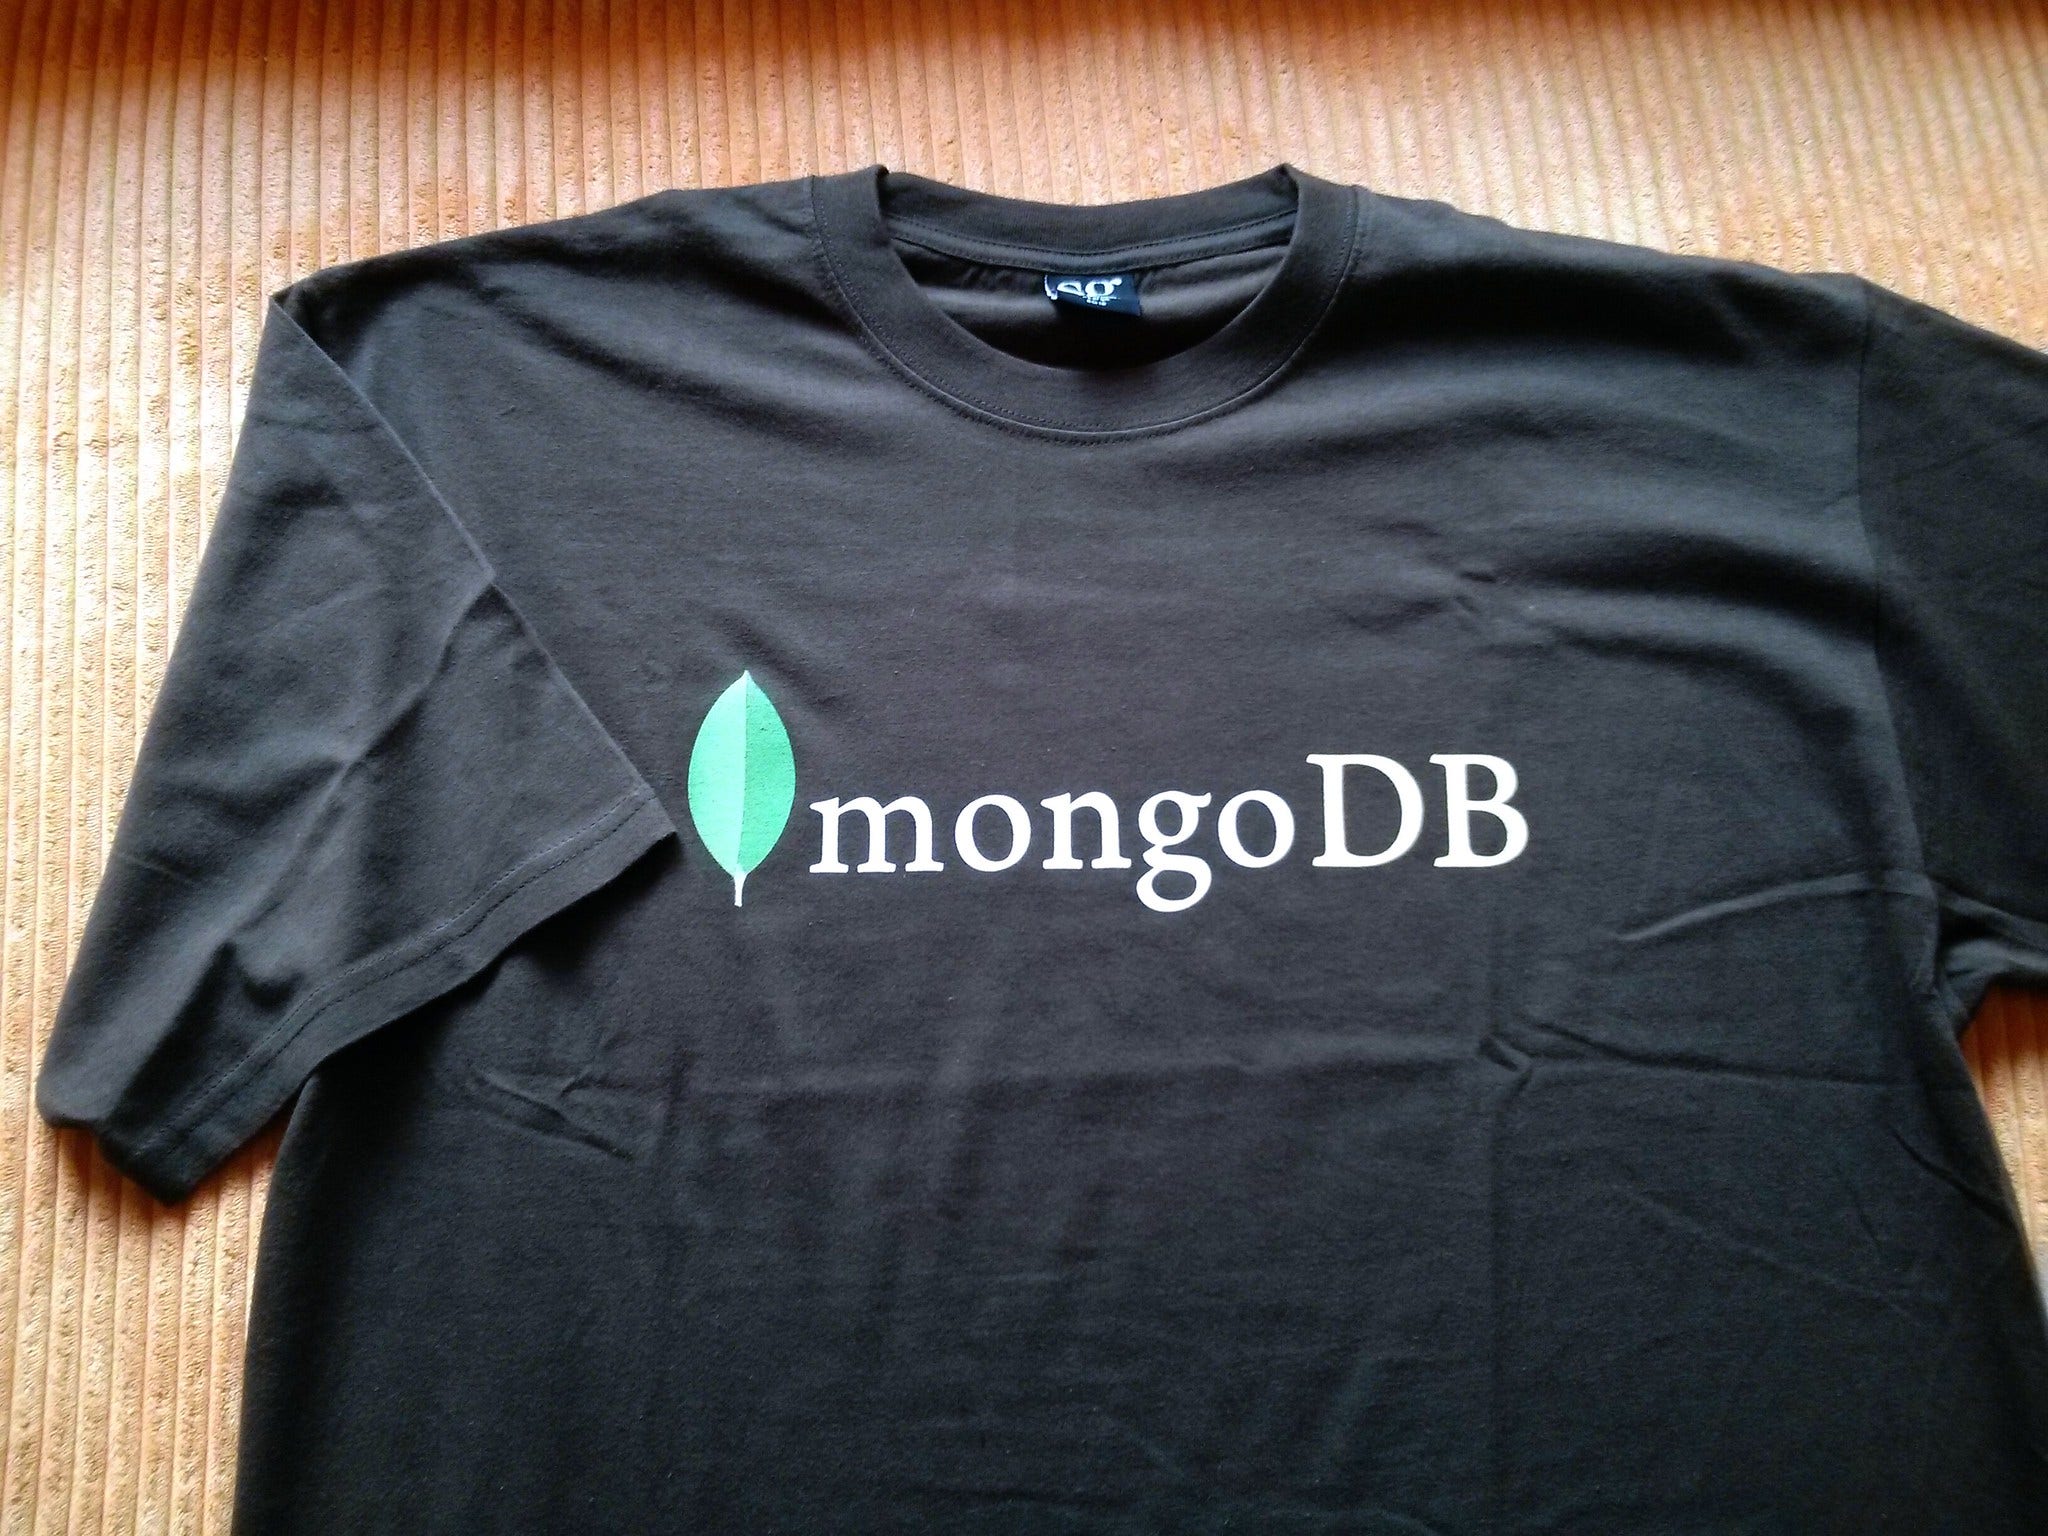 Here's Why MongoDB Stock Is Plunging Today